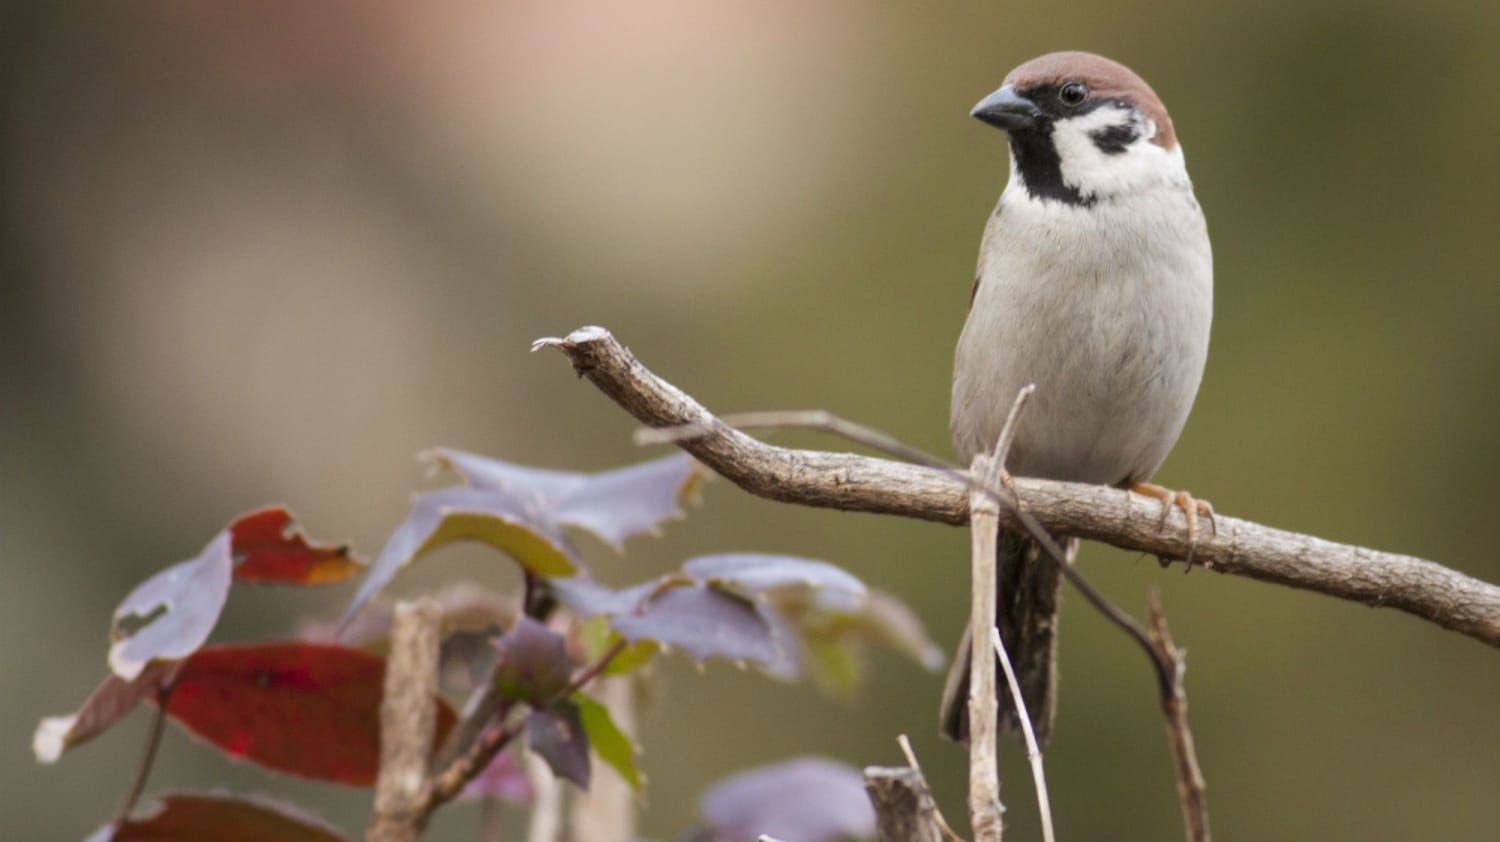 25 Things You Might Not Know About the Birds in Your Backyard